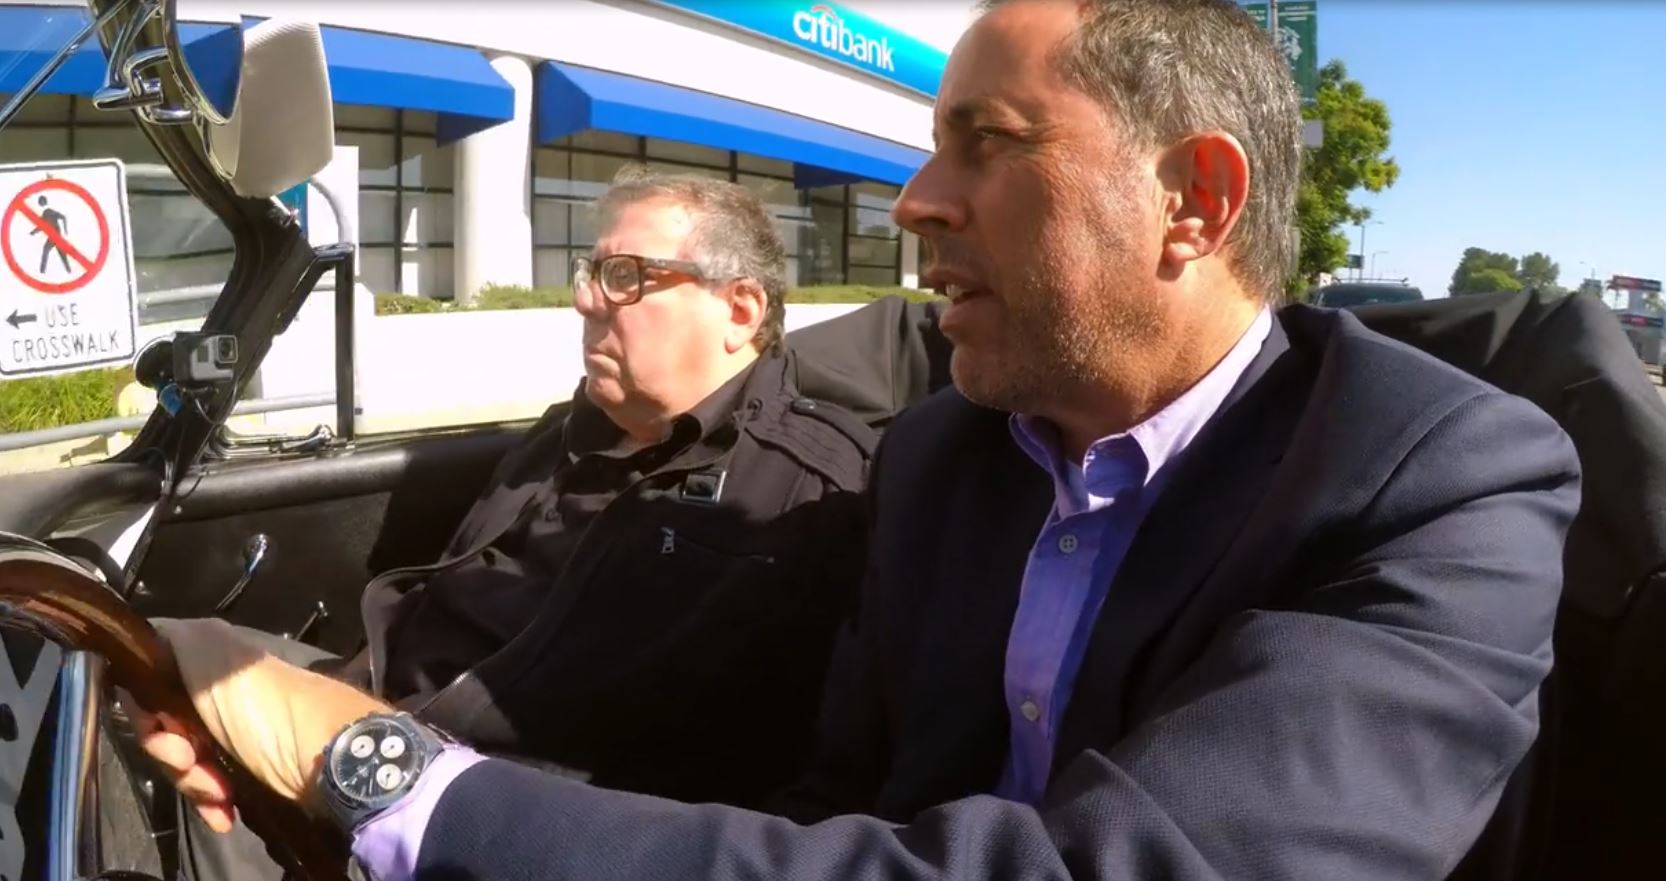 Spotted - Jerry Seinfeld Vintage Rolex 6239 Daytona from Vic Elford on TV-show Comedians in Cars Getting Coffee